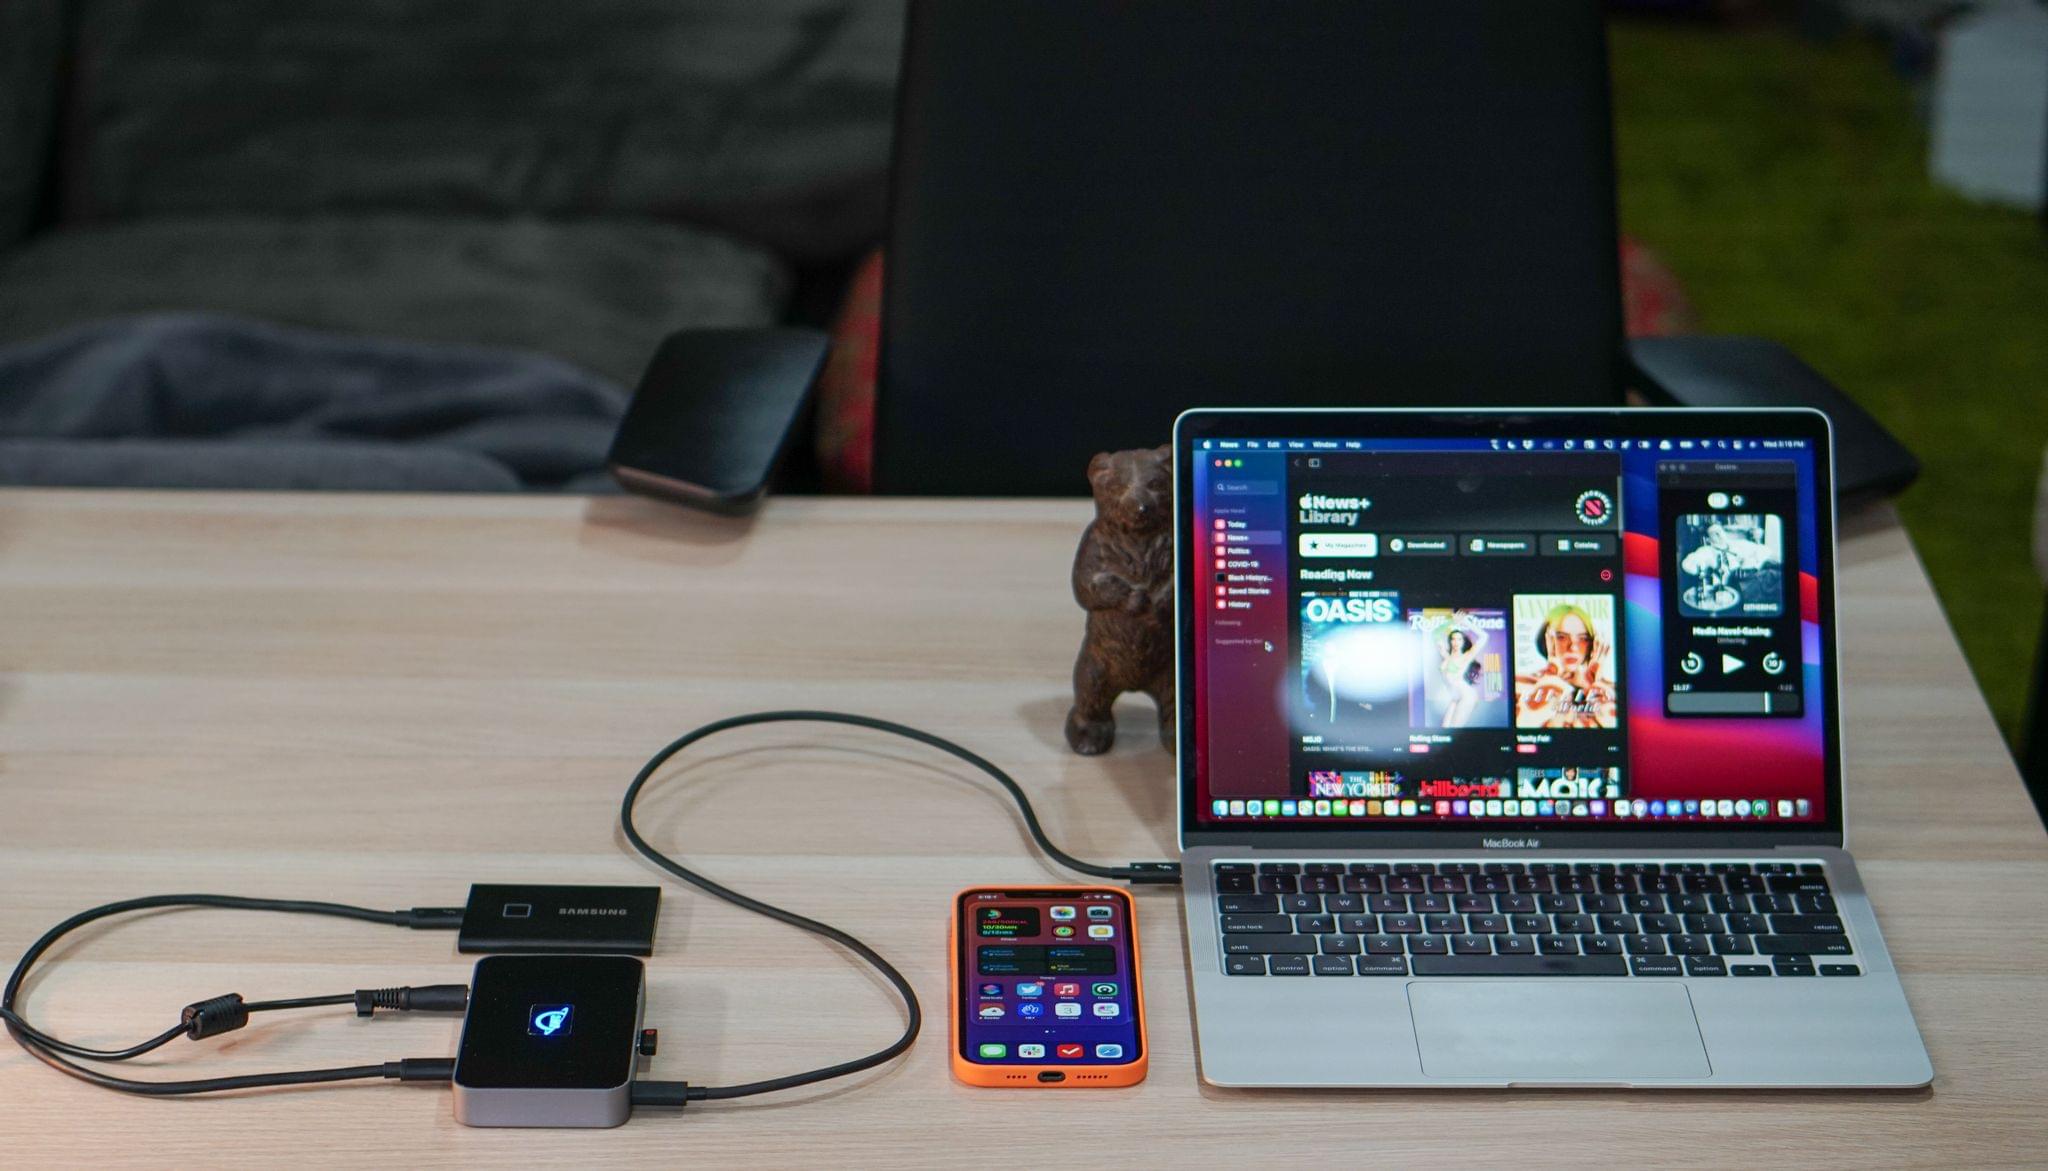 The M1 MacBook Air connected to OWC's Thunderbolt hub.